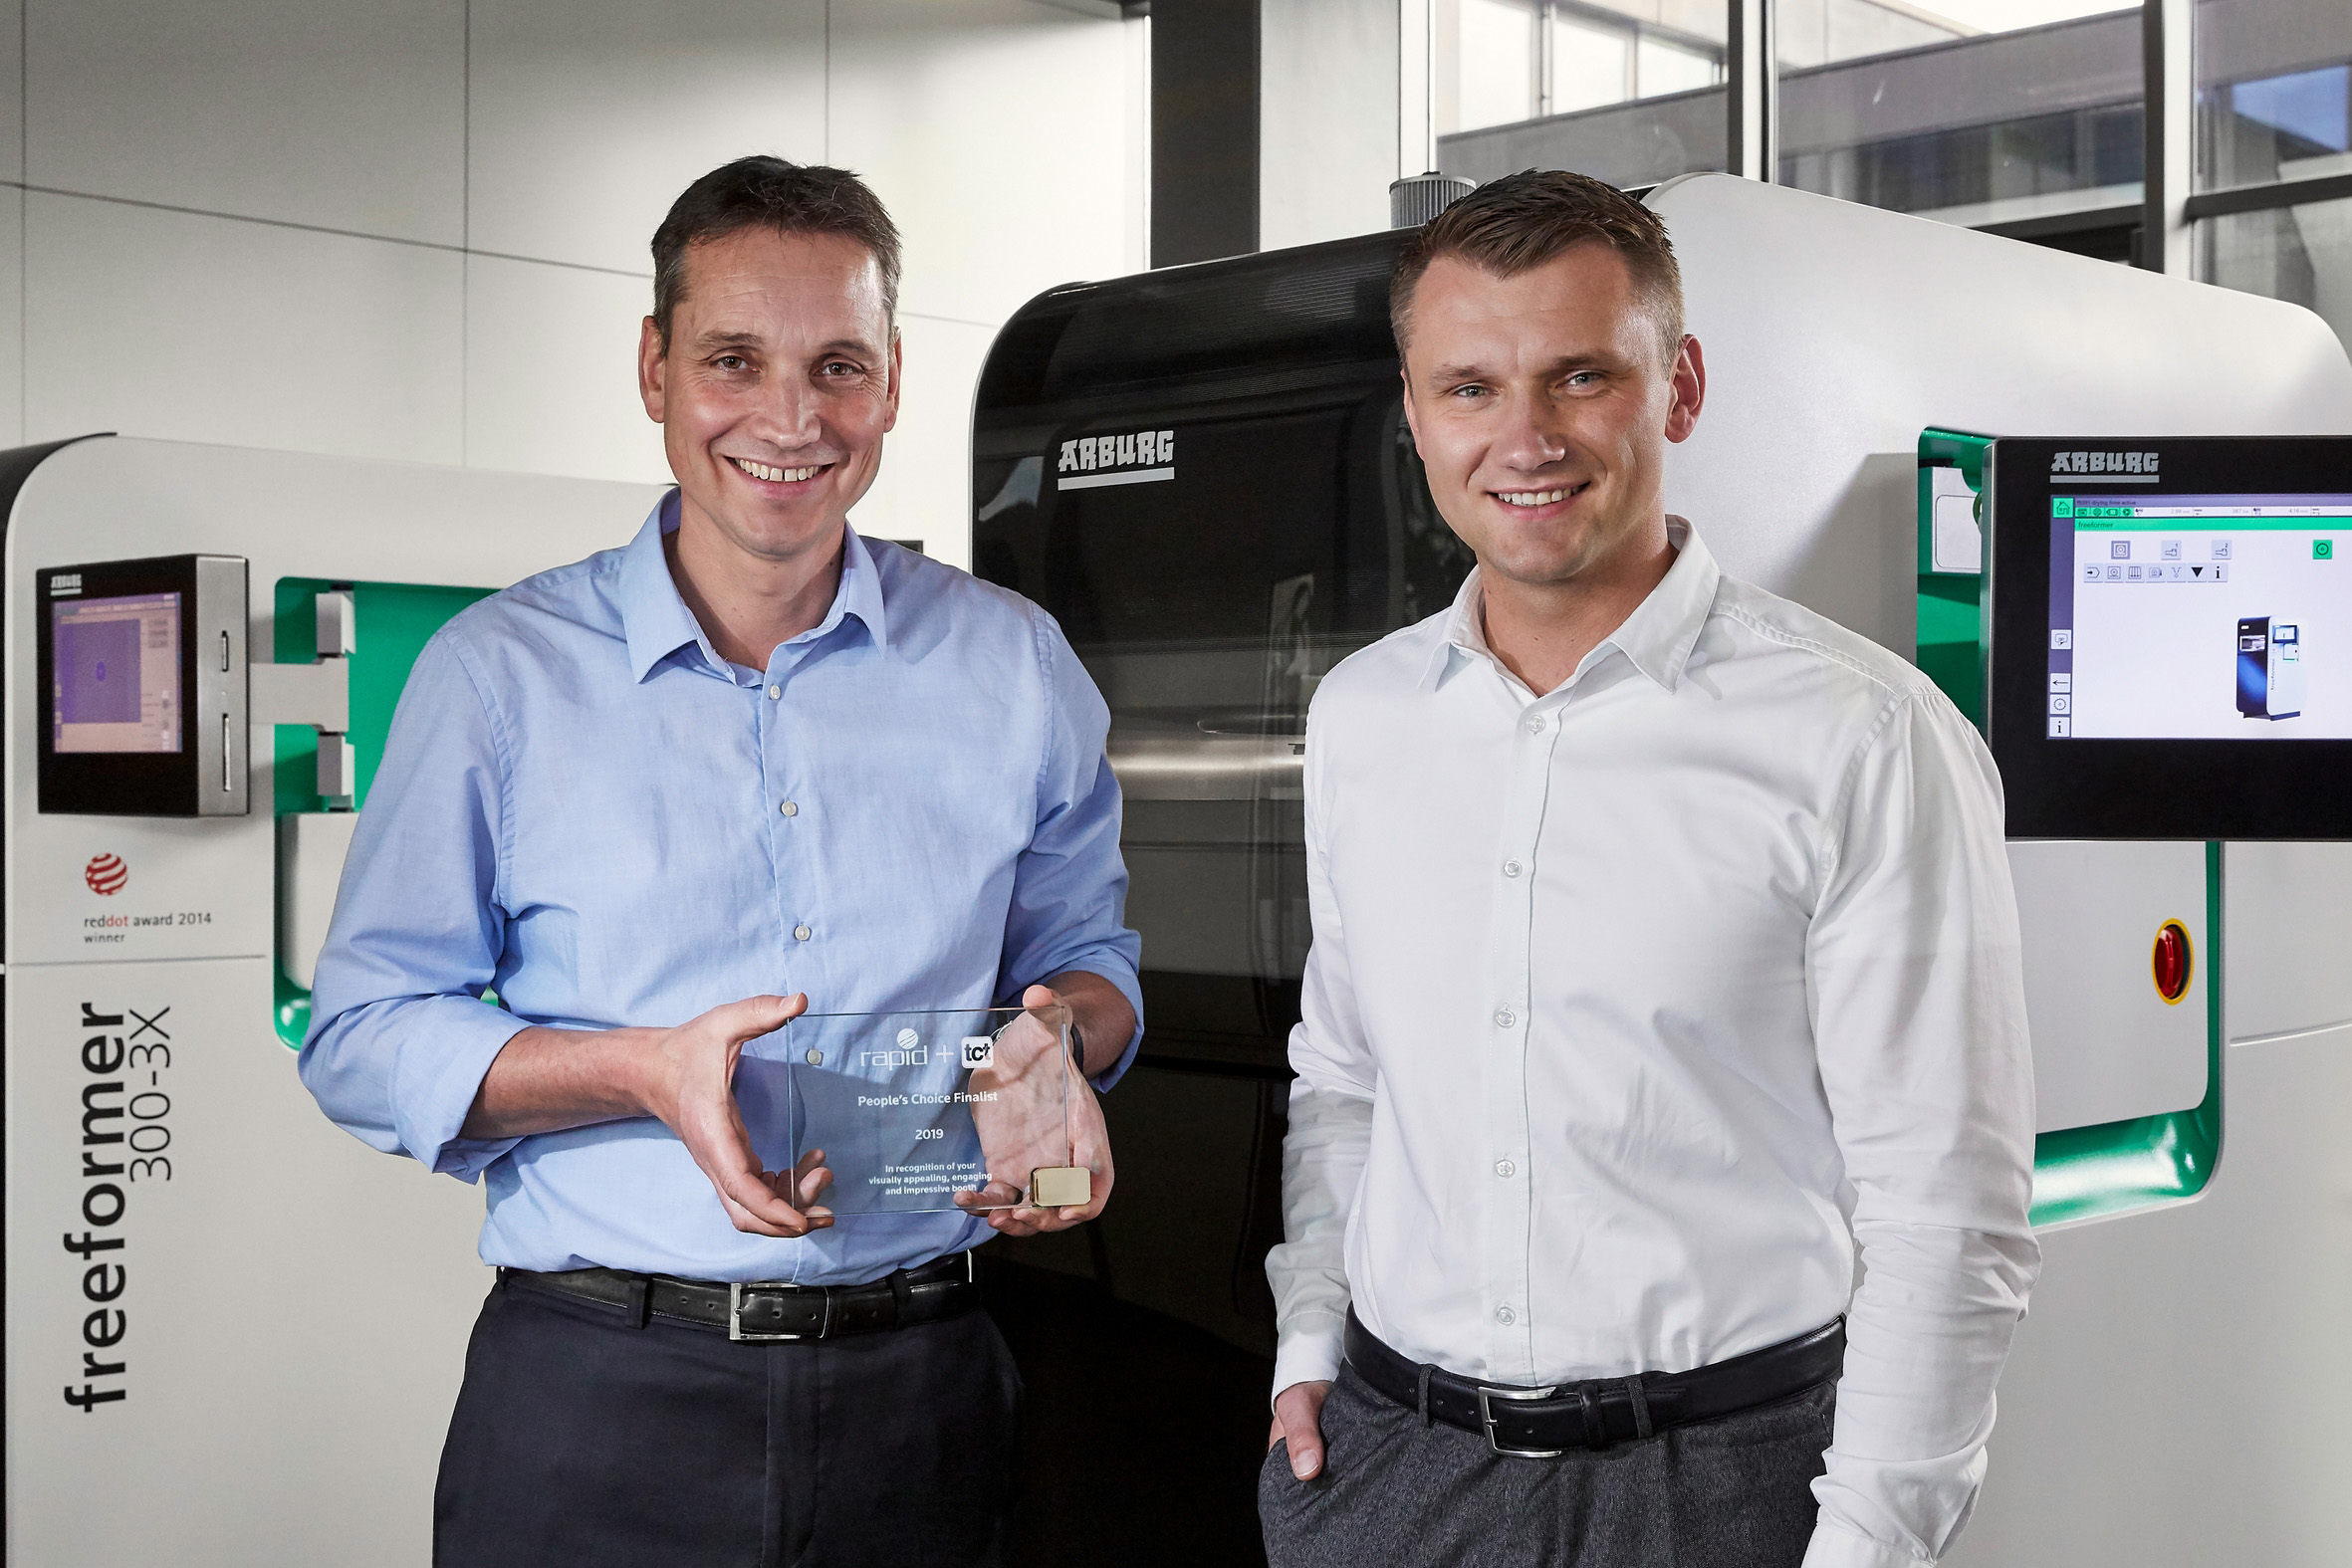 Lukas Pawelczyk, head of Freeformer sales (right), and Martin Neff, head of plastic freeforming. (Photo courtesy Arburg.)